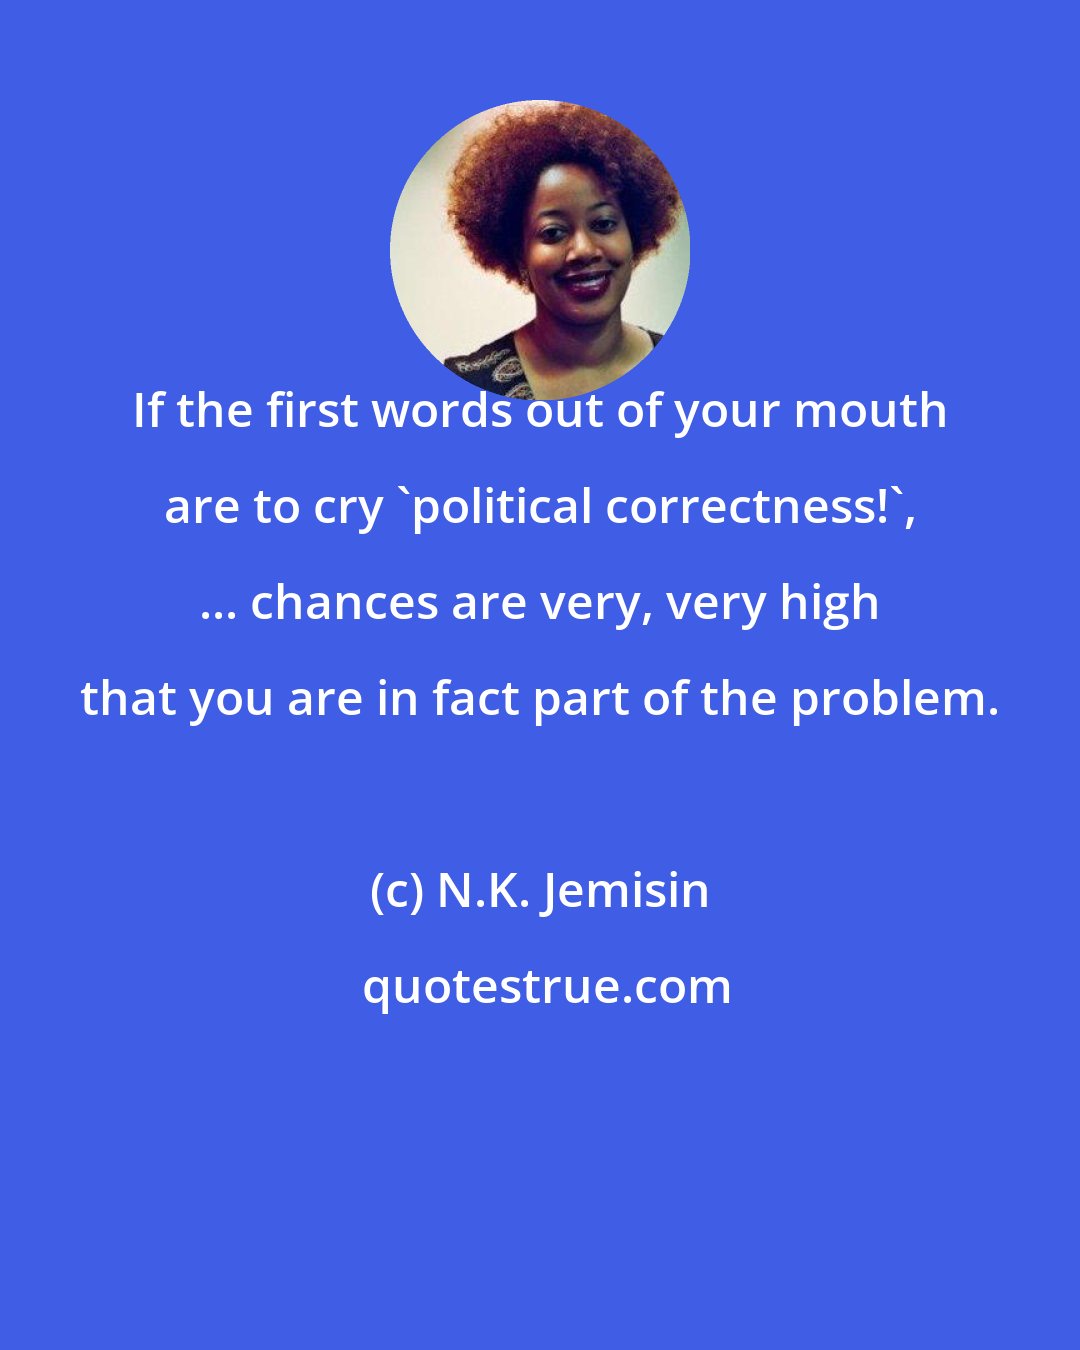 N.K. Jemisin: If the first words out of your mouth are to cry 'political correctness!', ... chances are very, very high that you are in fact part of the problem.